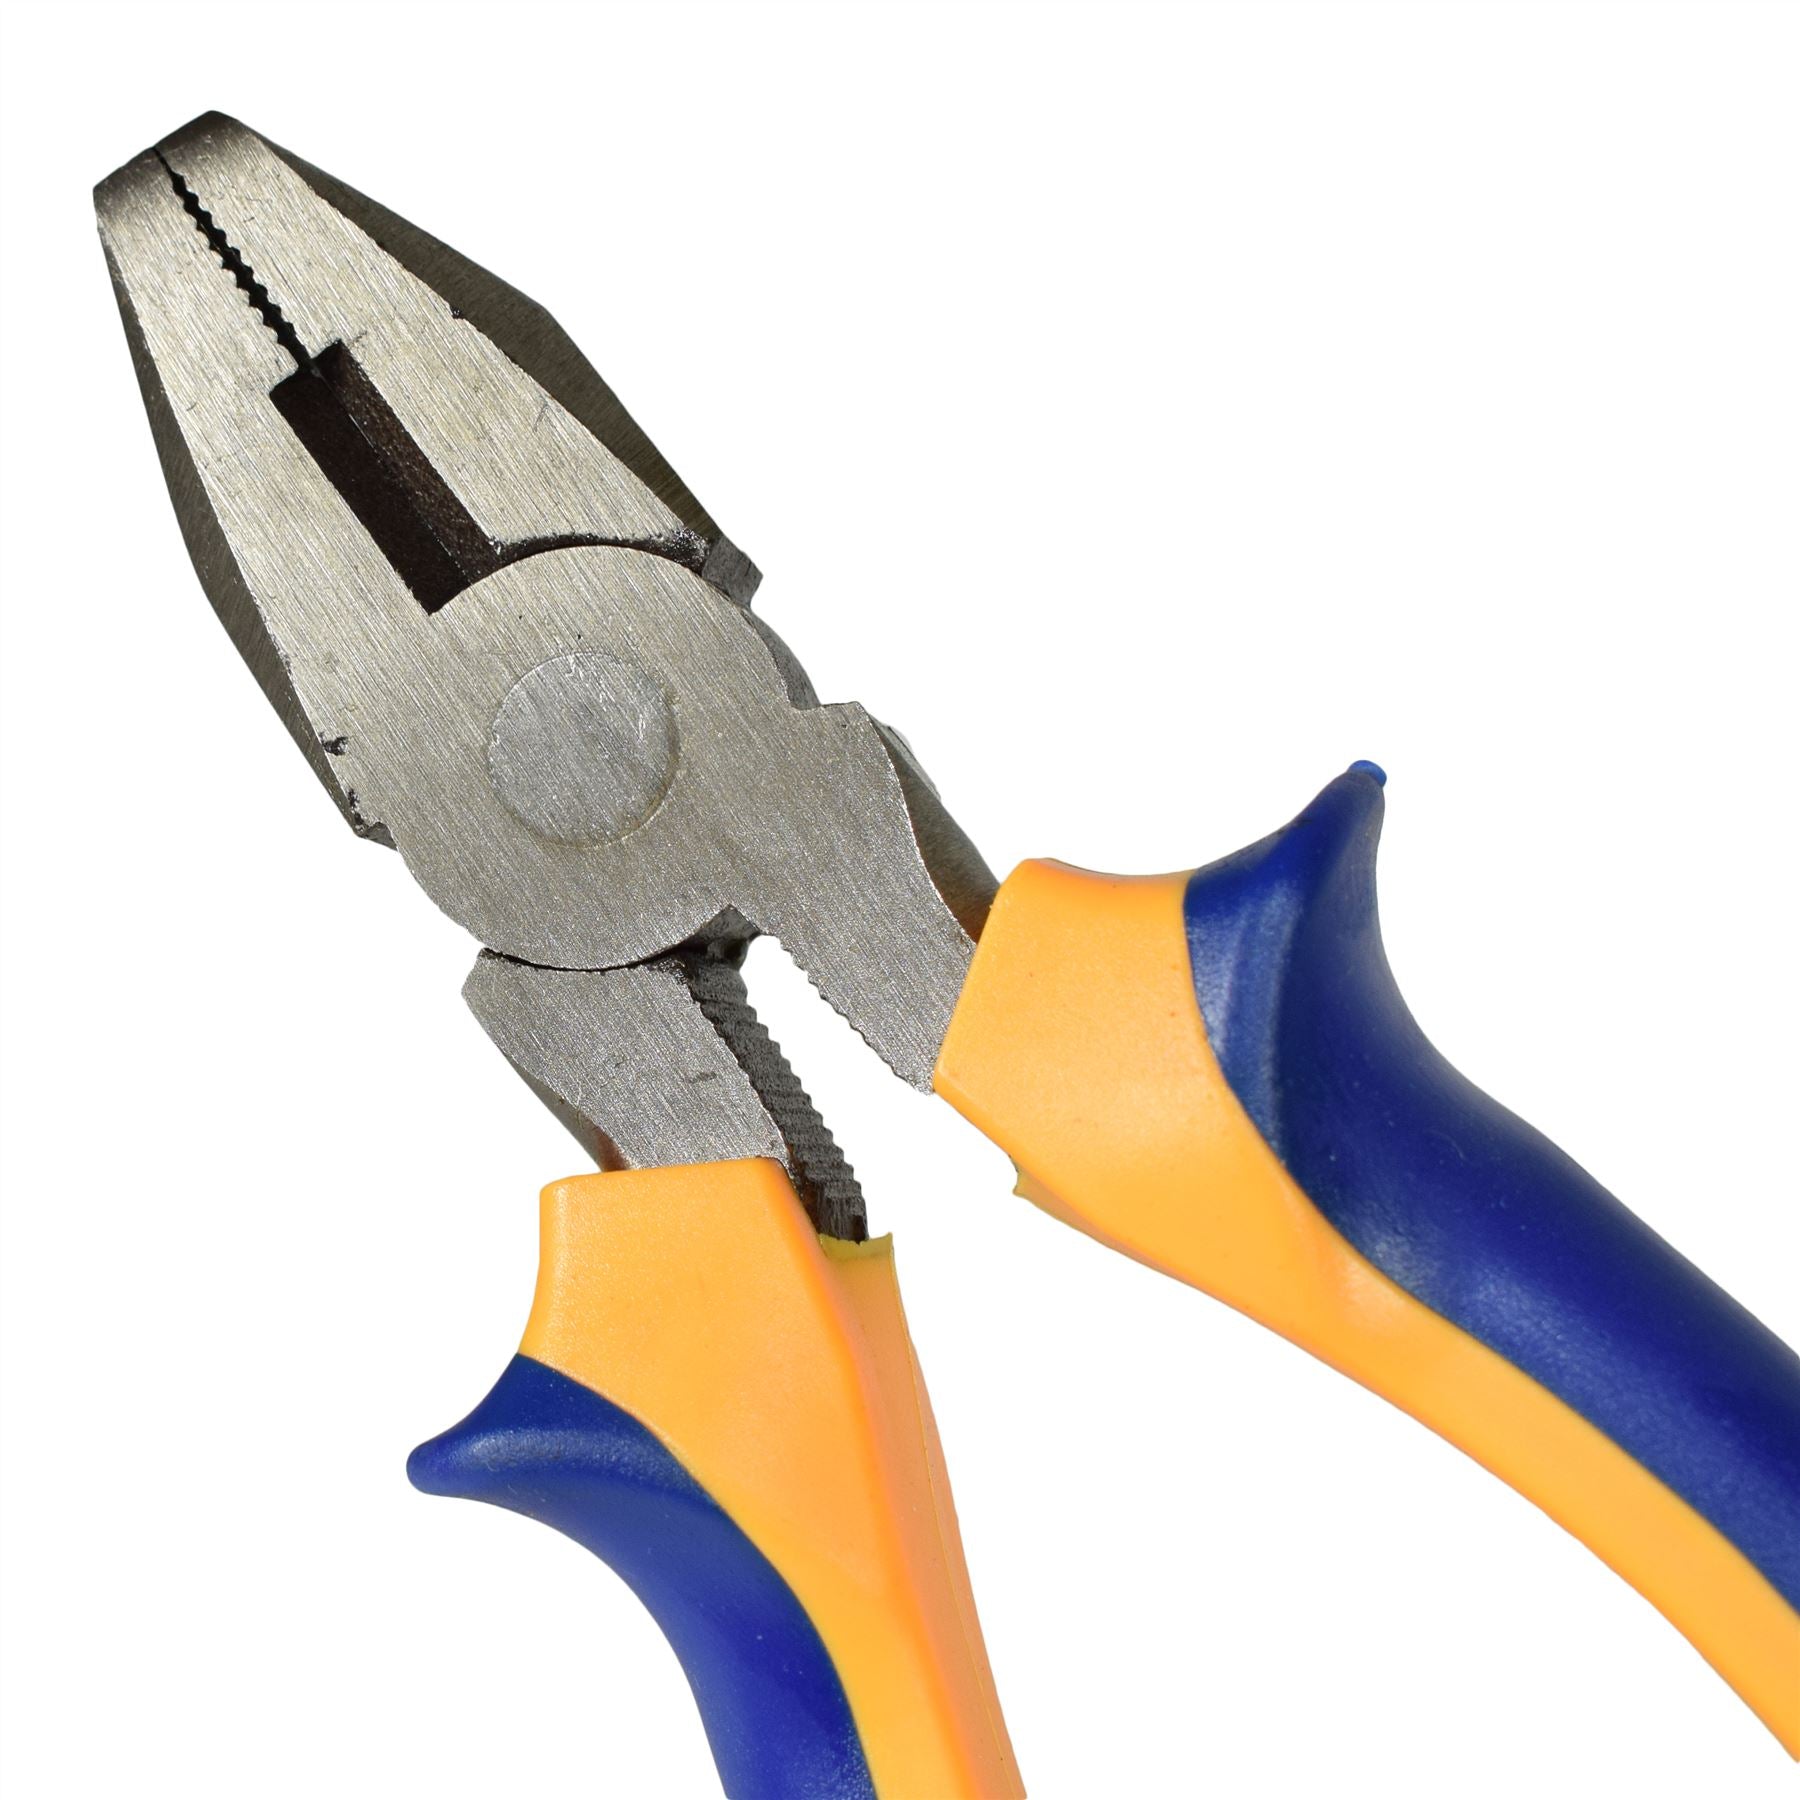 Combination Combo Engineers Soft Grip High Leverage Pliers 6 - 1/2 Inch / 170mm